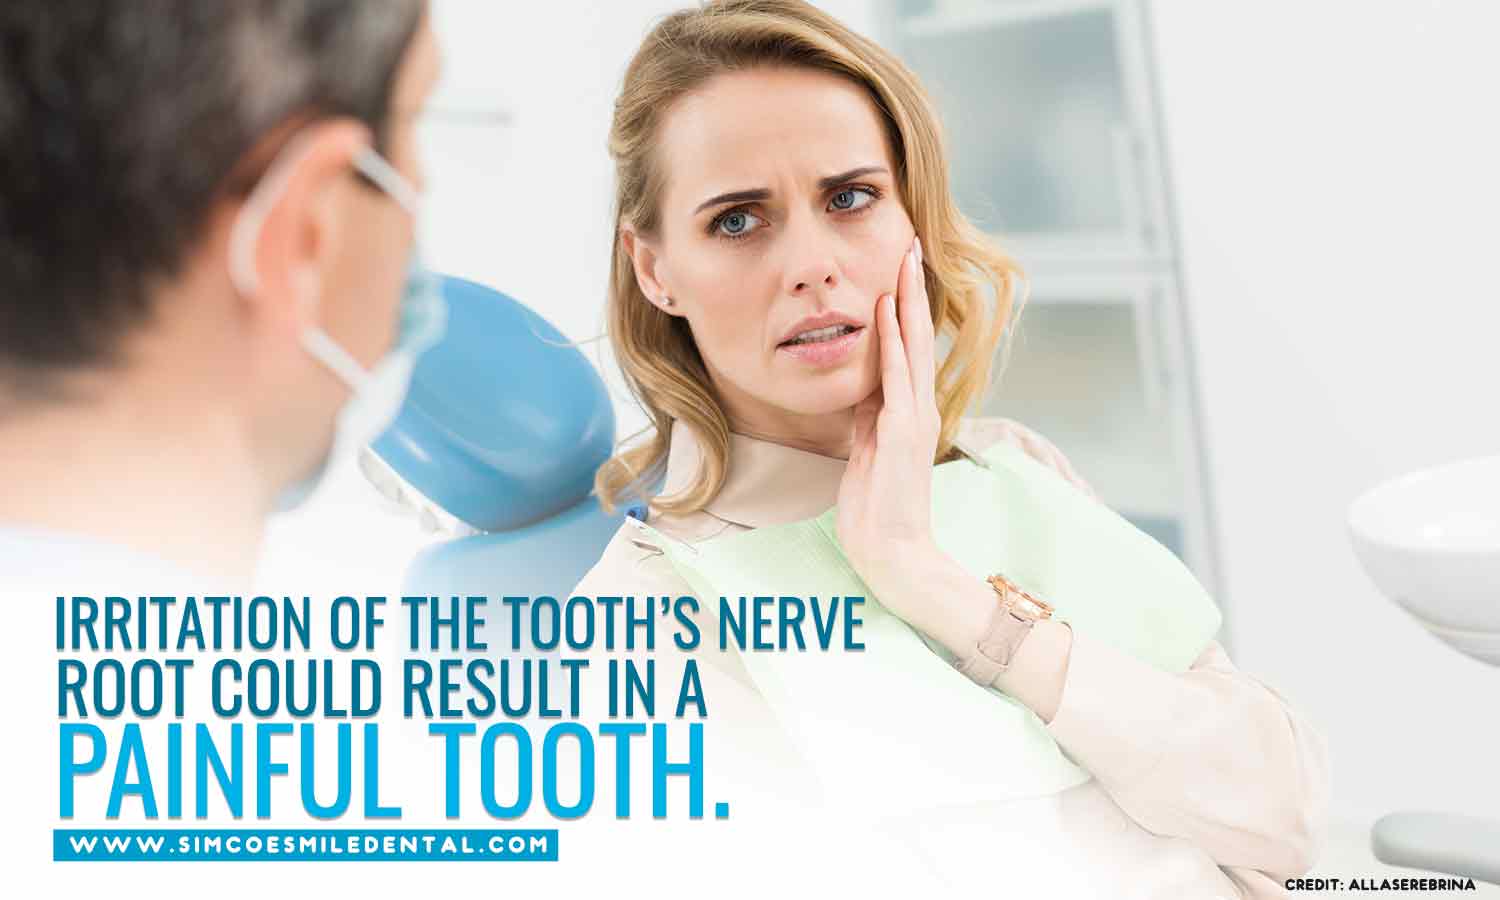 Dental Problems You Should Never Ignore